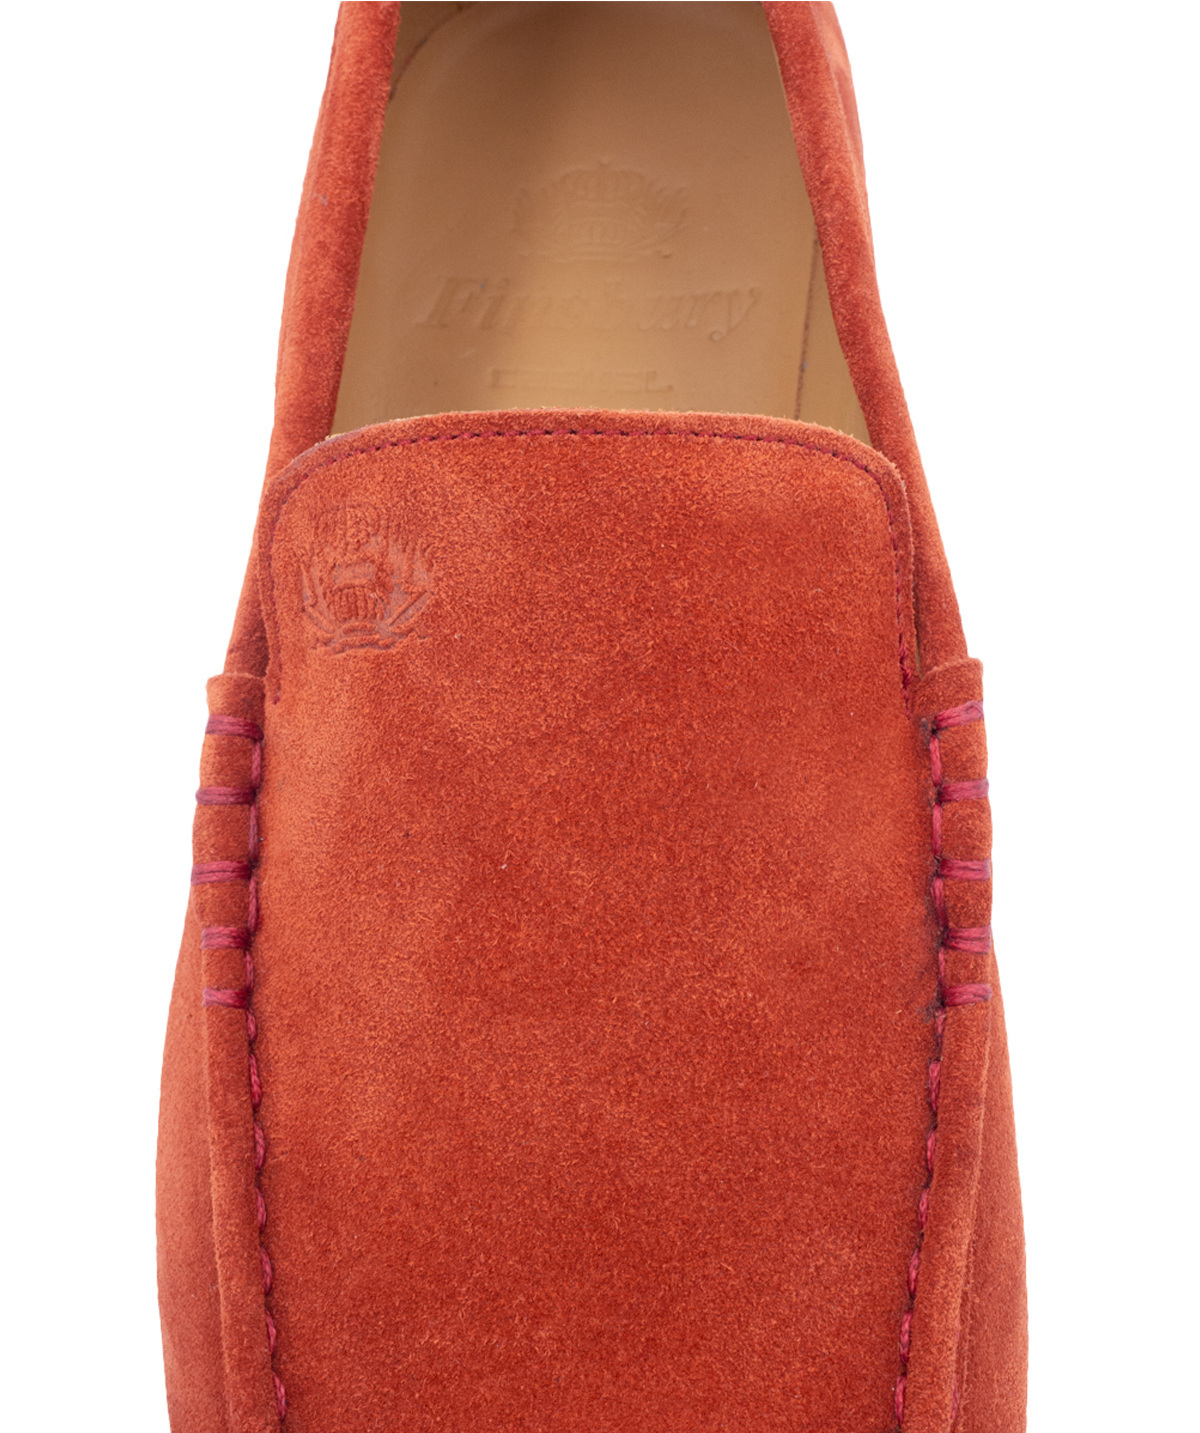 Loafer Red Suede